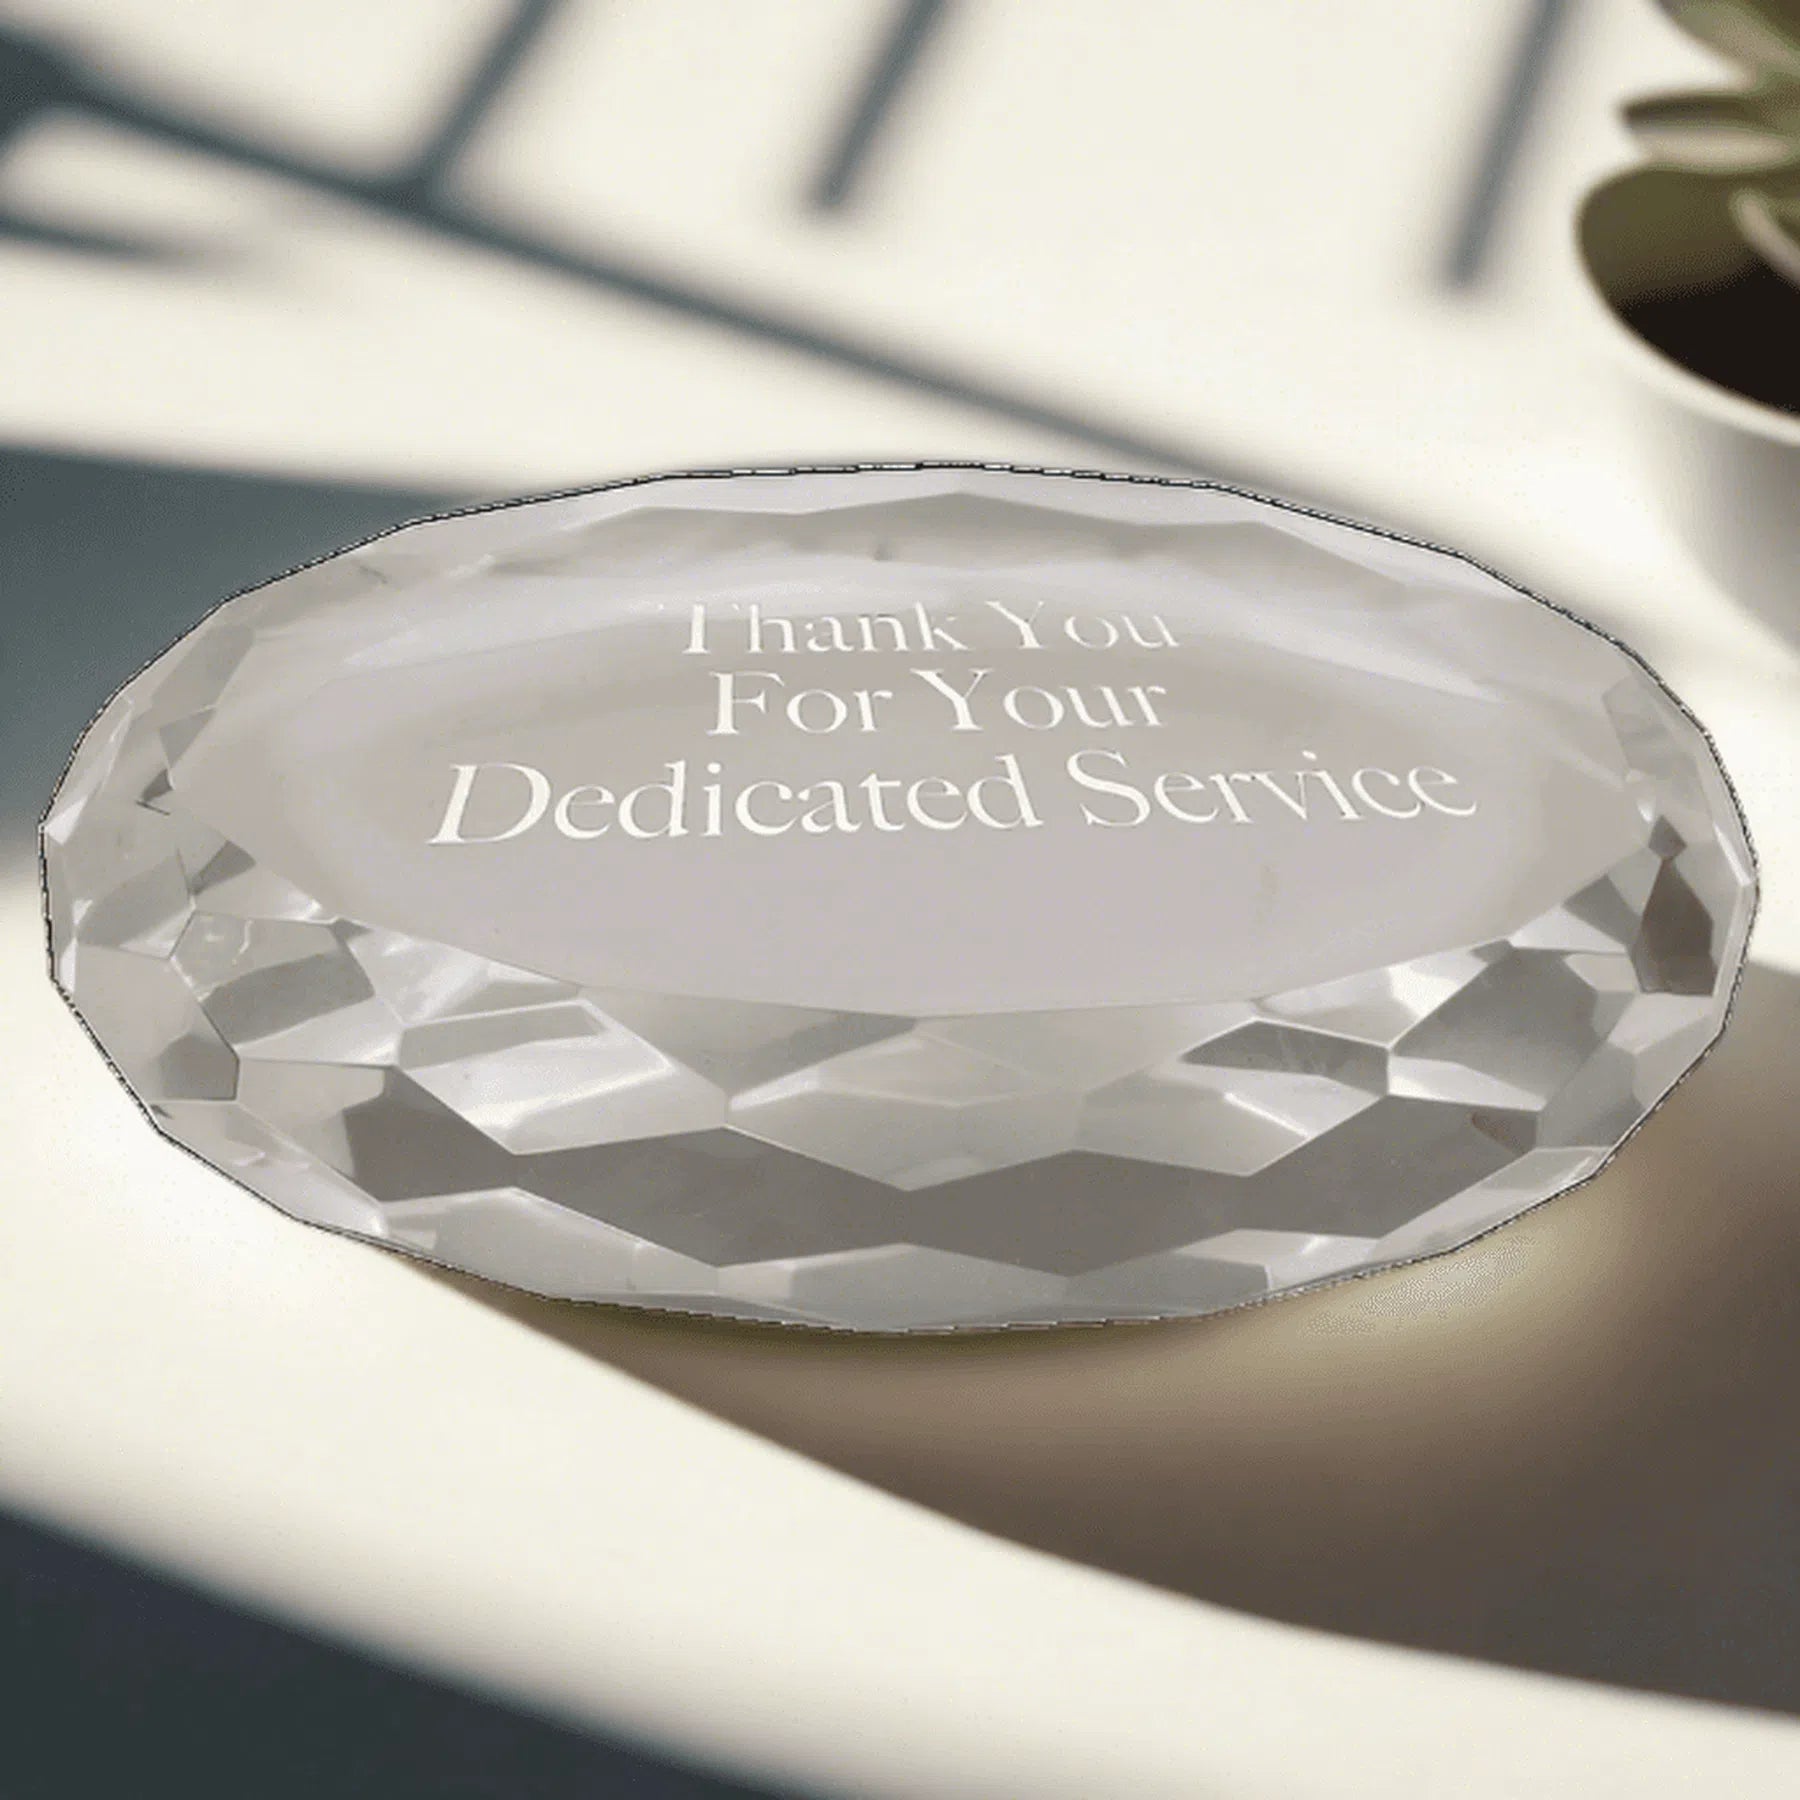 4" x 2 3/4" Personalized Oval Crystal Paperweight